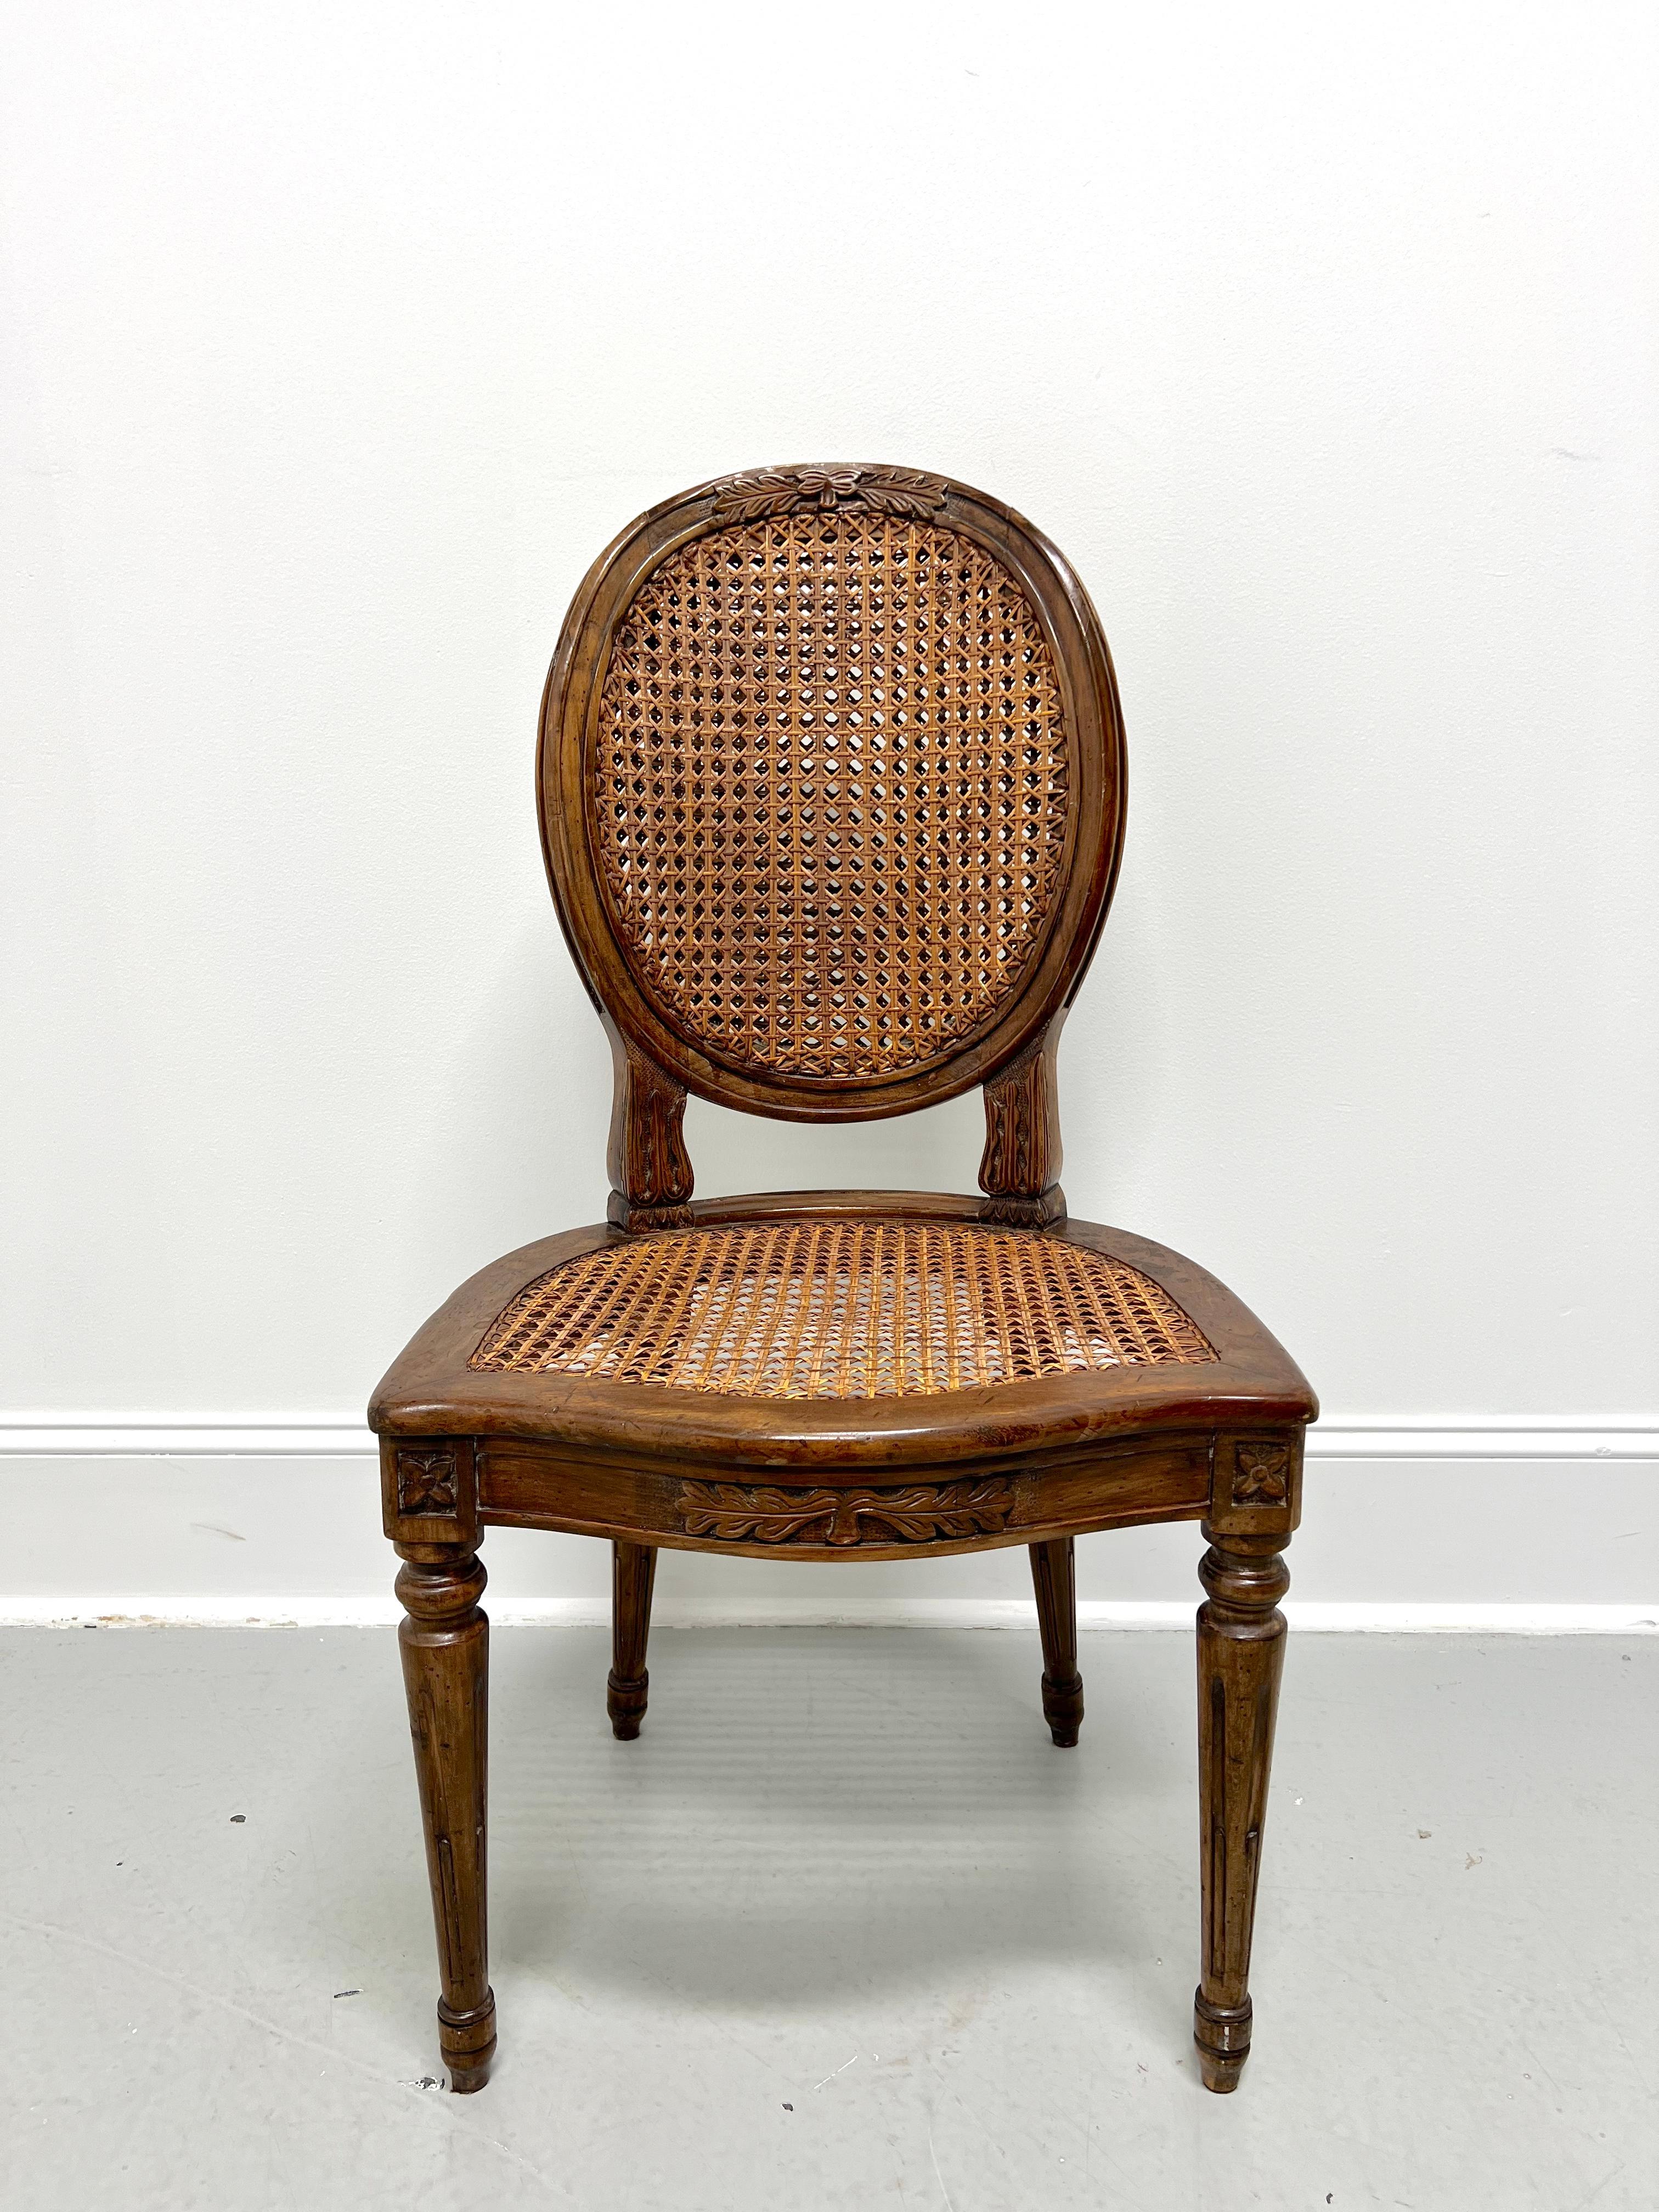 An antique side chair in the Italian Provincial style, unbranded. Solid walnut, balloon back with a decoratively embellished crest rail, woven caned back & seat, decoratively embellished apron & knees, fluted tapered straight front legs, and spade